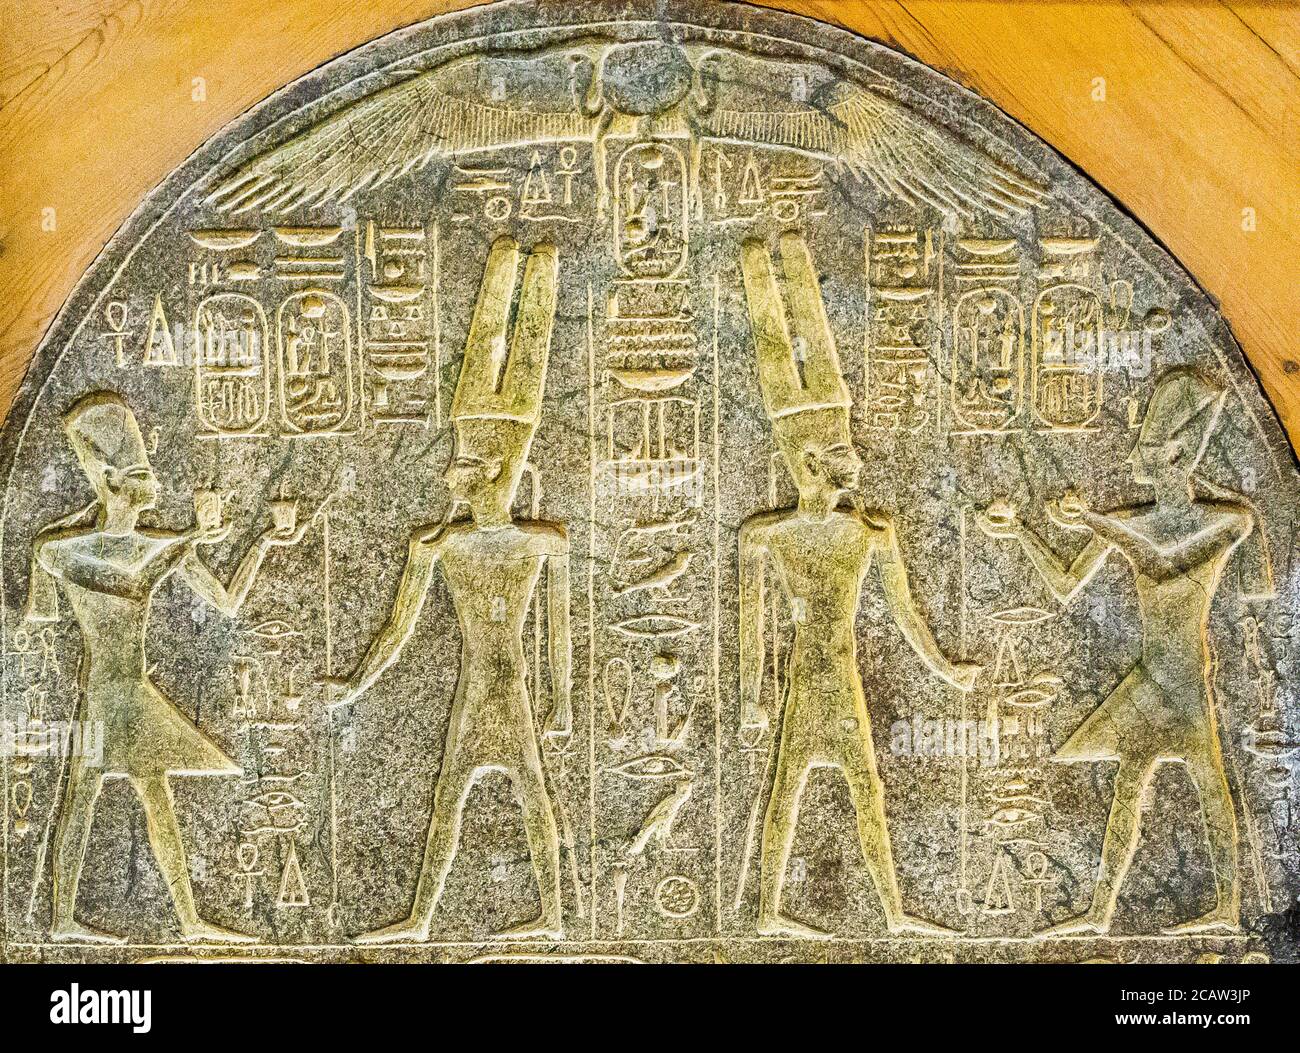 Egypt, Cairo, Egyptian Museum, stele of Ramses II, found in a ramesside temple near the valley temple of Hatchepsout, West Bank of Luxor. Stock Photo